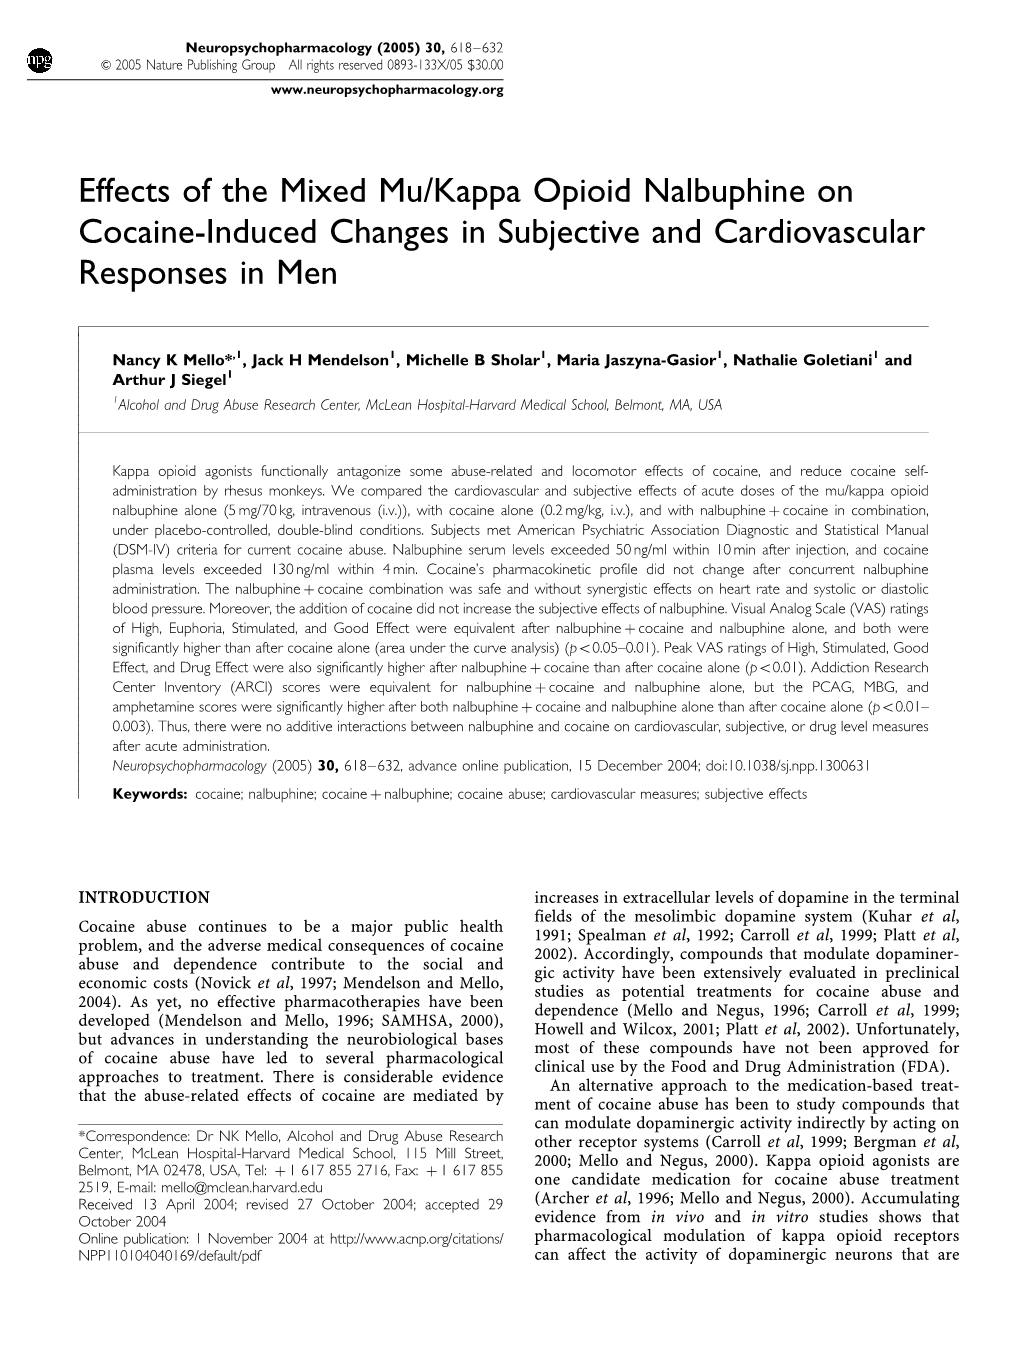 Effects of the Mixed Mu/Kappa Opioid Nalbuphine on Cocaine-Induced Changes in Subjective and Cardiovascular Responses in Men